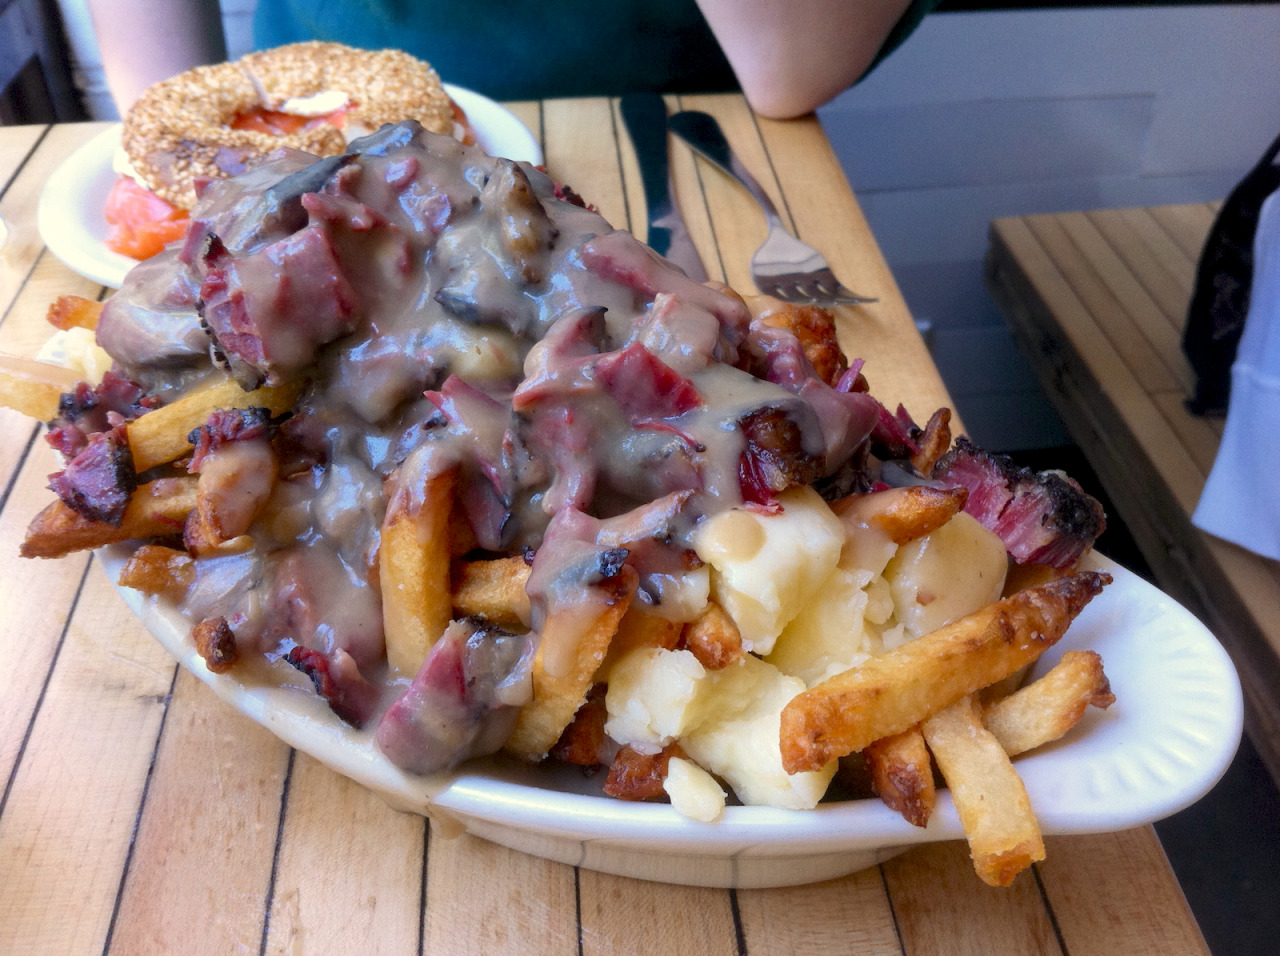 foodrepublic:
“ Poutine topped with shaved foie gras? Yes please!
Celebrate Mile End Deli’s #PoutineWeek with this loaded menu: http://bit.ly/1juxBiy
”